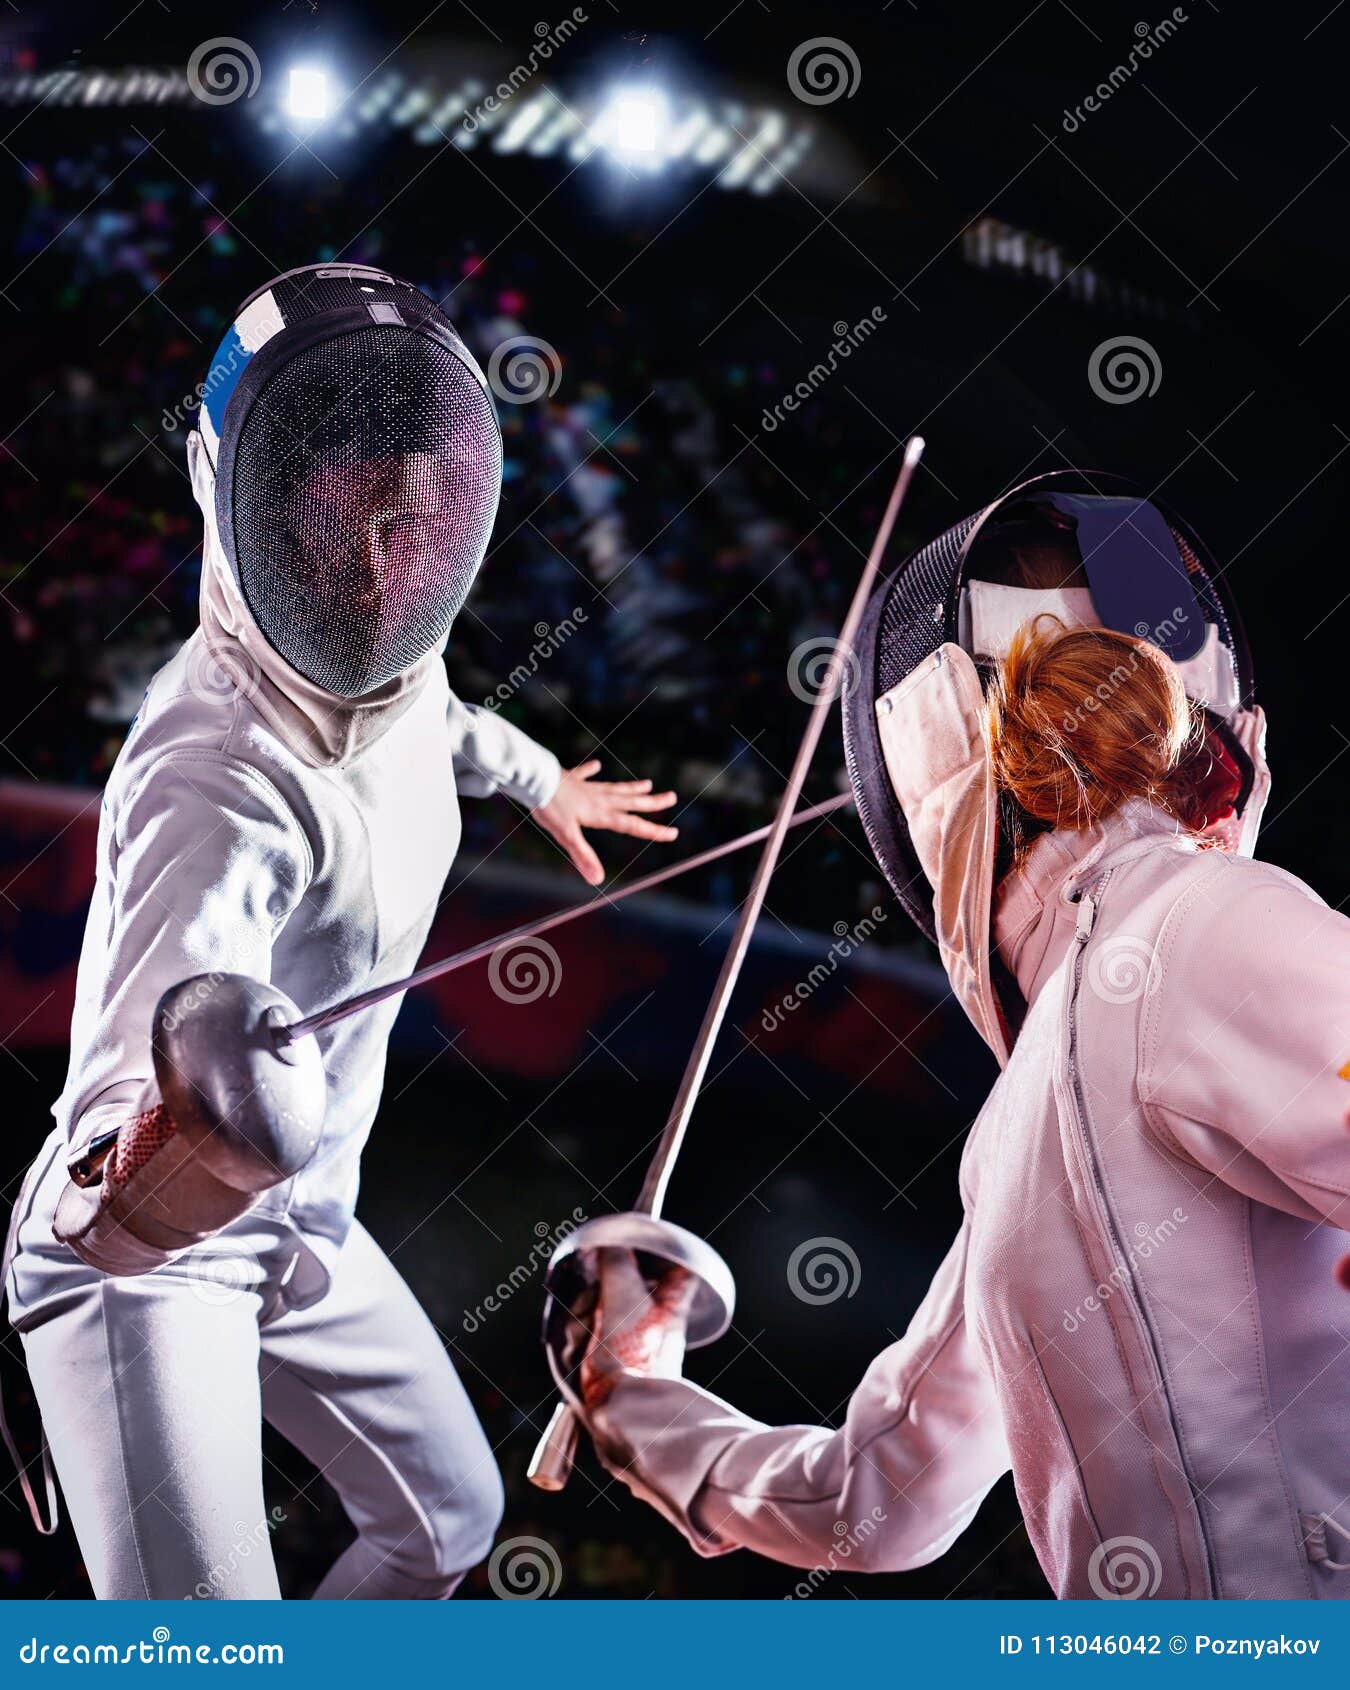 fencing sport for women epee fencer.